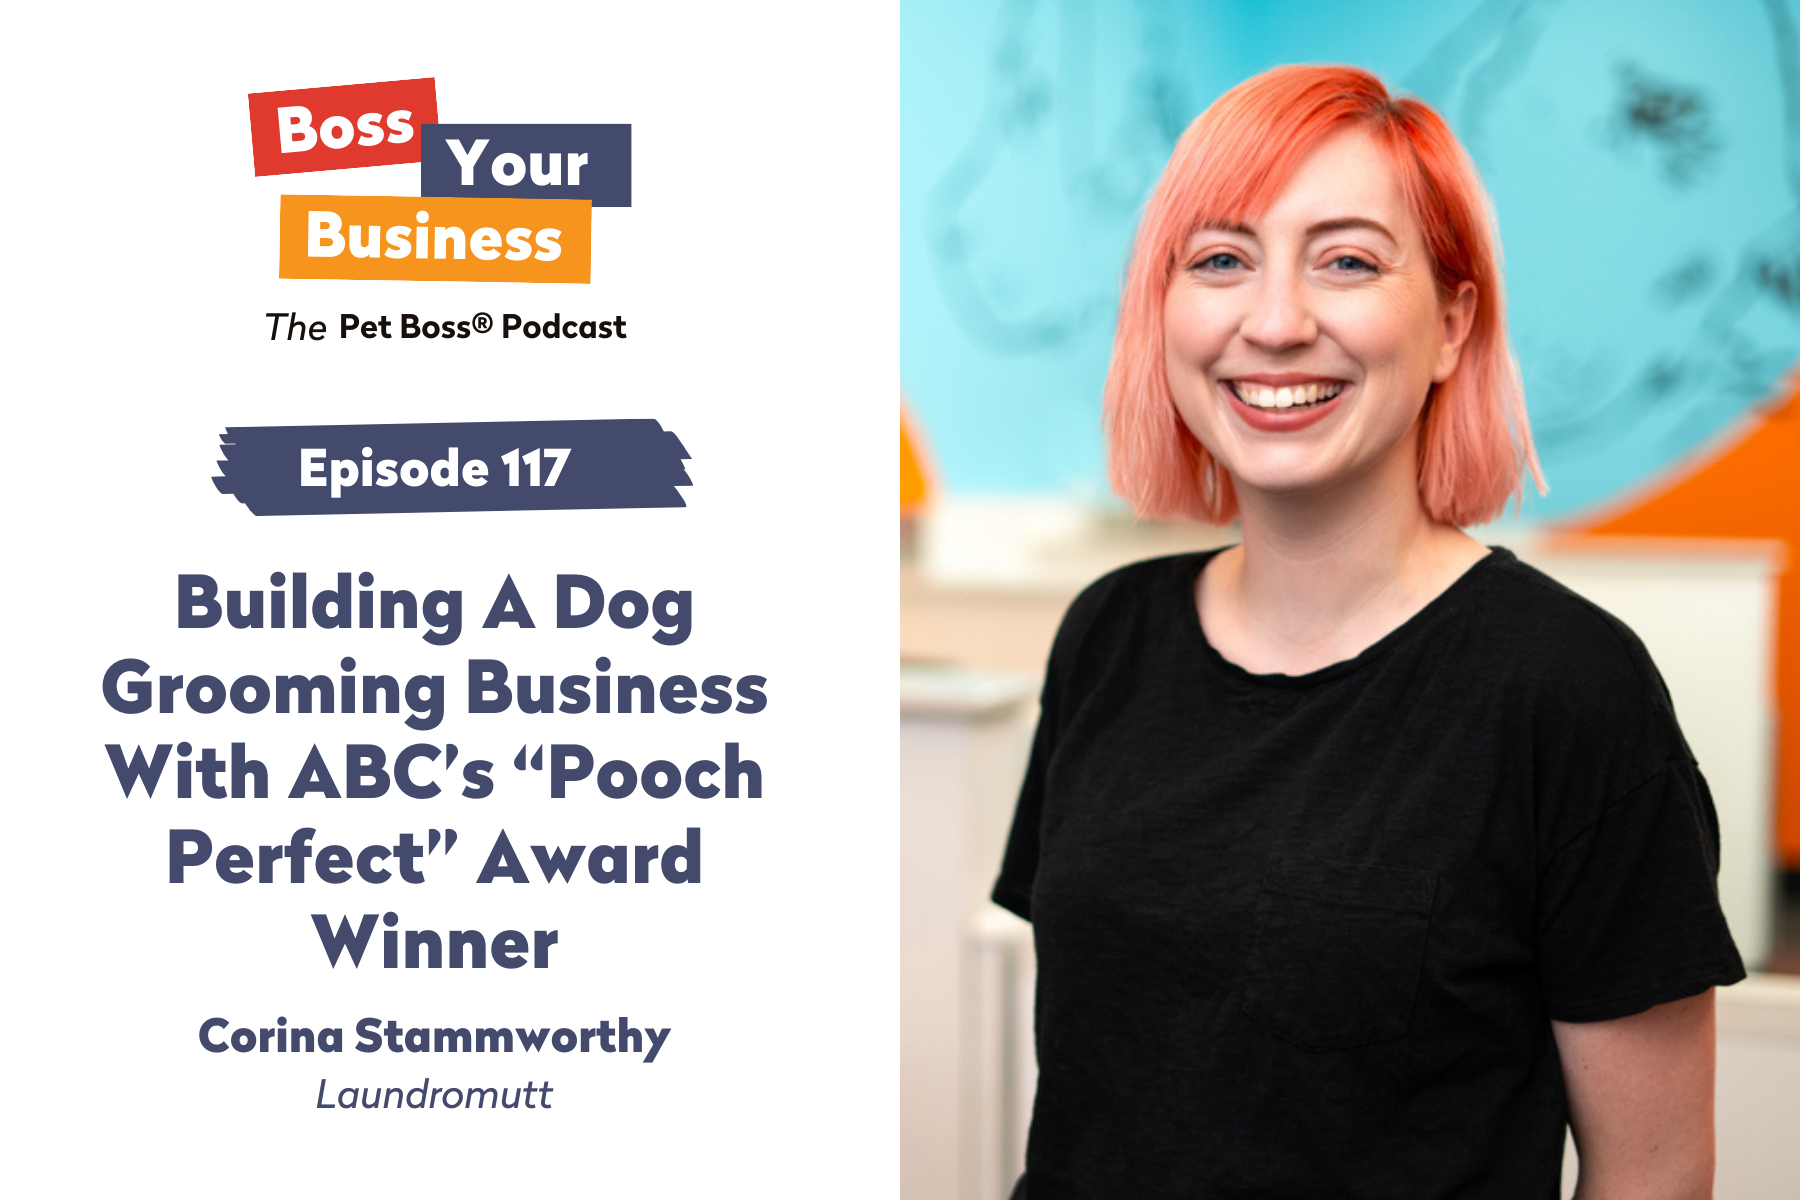 Episode 117 | Building A Dog Grooming Business With ABC’s “Pooch Perfect” Award Winner